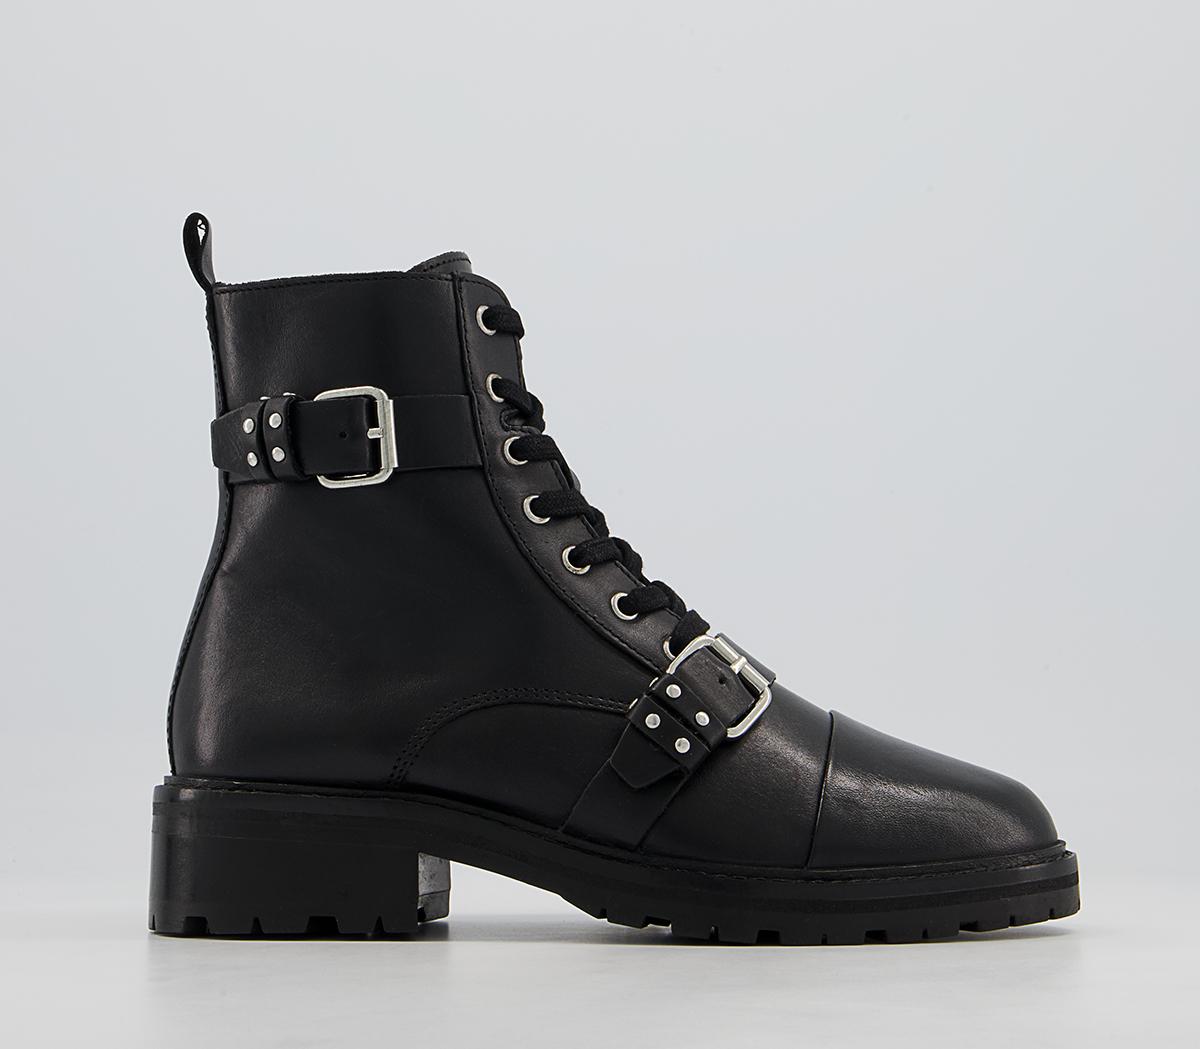 OFFICE Ambrosa Lace Up Strappy Studded Boots Black Leather - Women's Boots